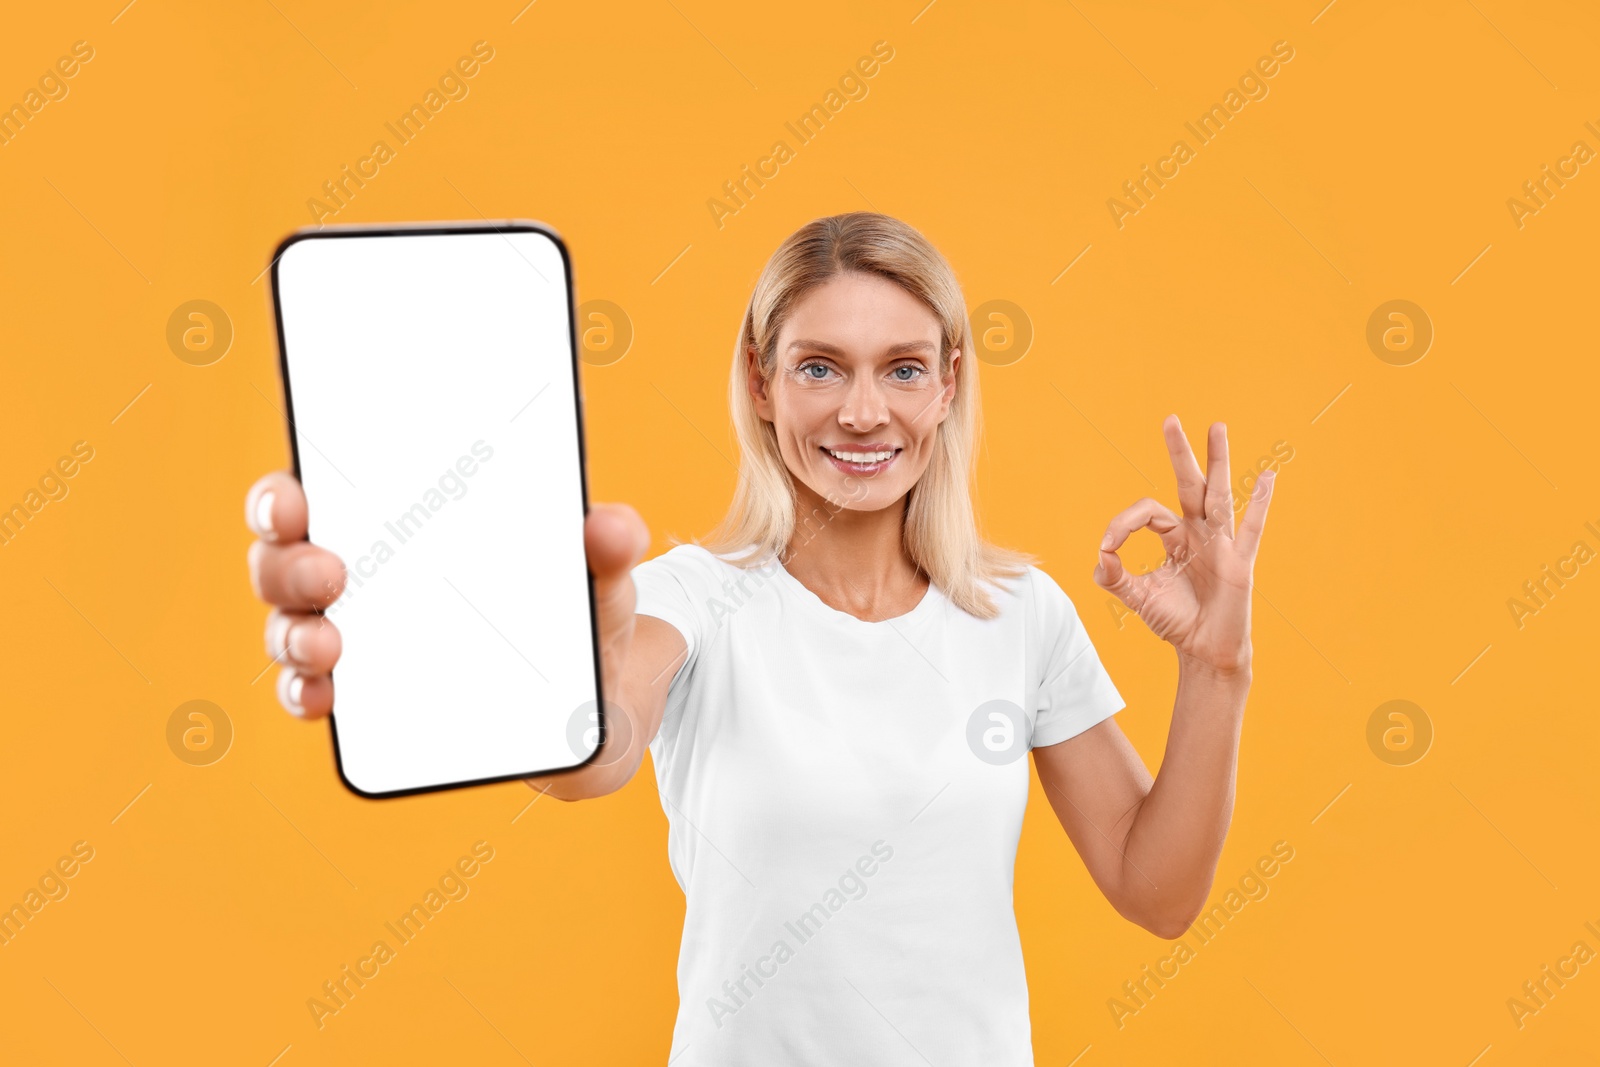 Photo of Happy woman holding smartphone with blank screen and showing OK gesture on orange background